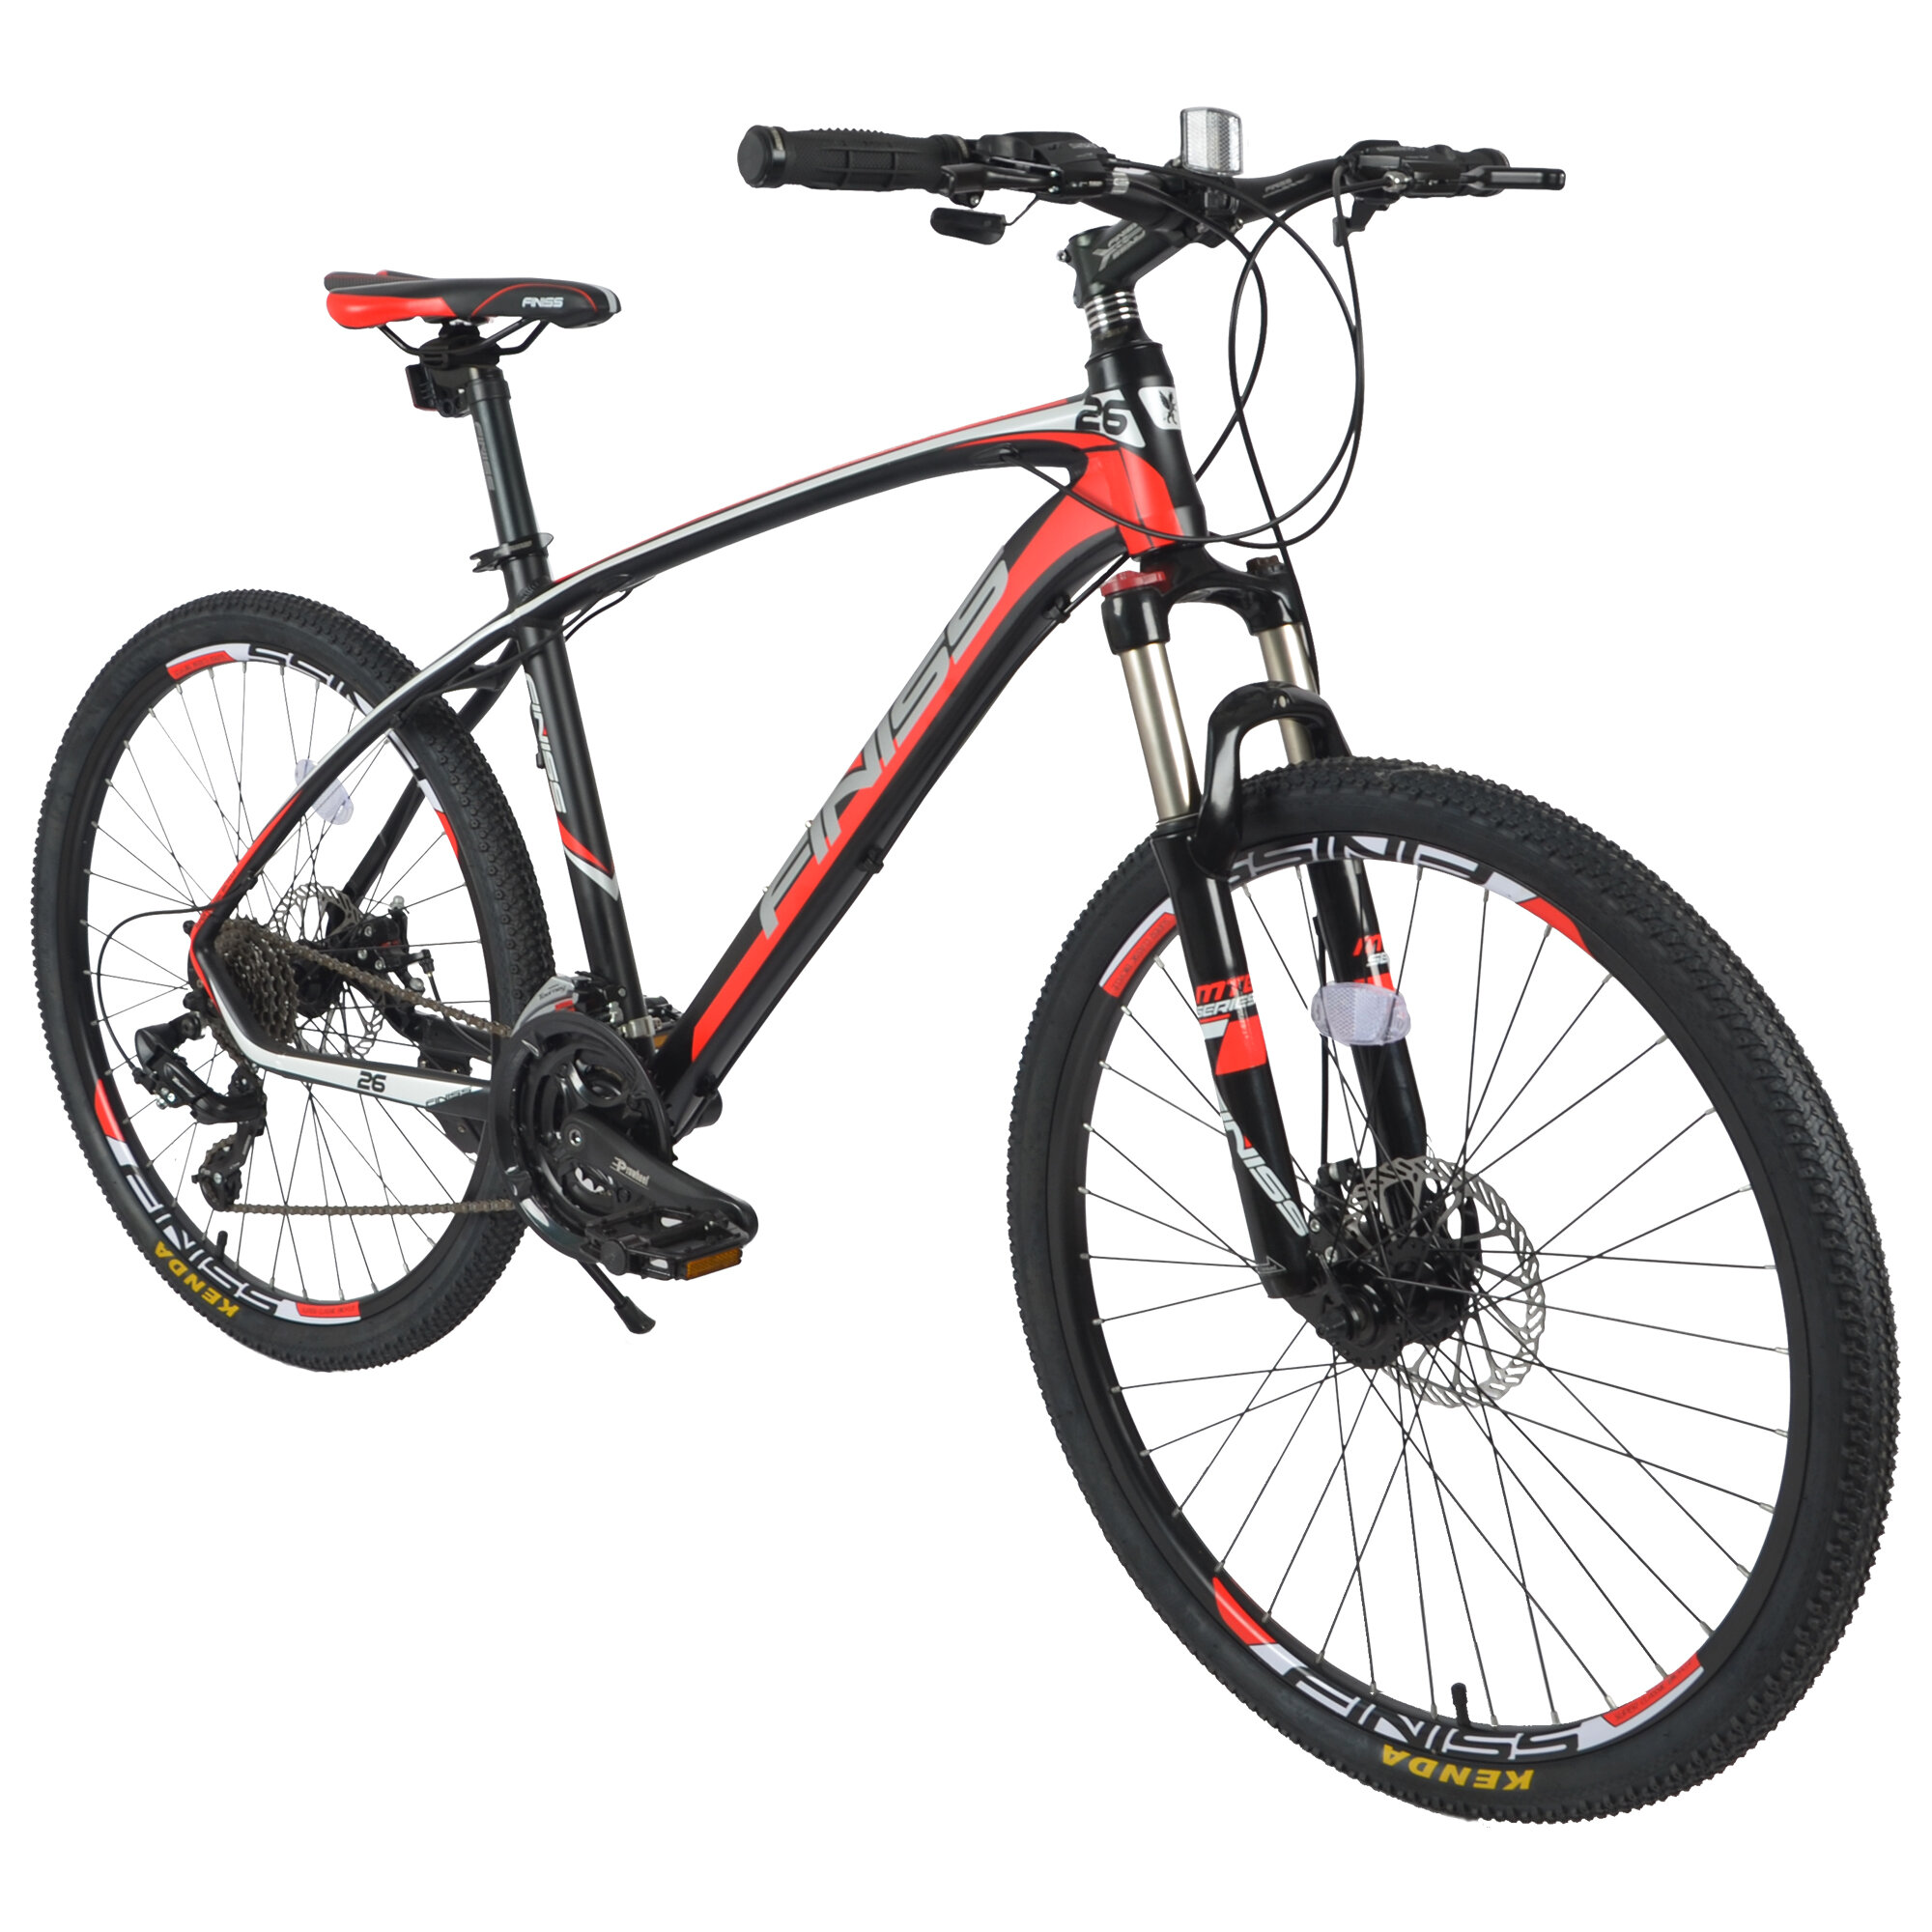 Rafflesia Arnoldi Ham Neerwaarts US Direct] 26 Inch 24-Speeds Mountain Bike Aluminium Alloy Frame & Disk  Brake MTB Outdoor Cycling Bicycle For Male and Female Sale - Banggood  USA-arrival notice